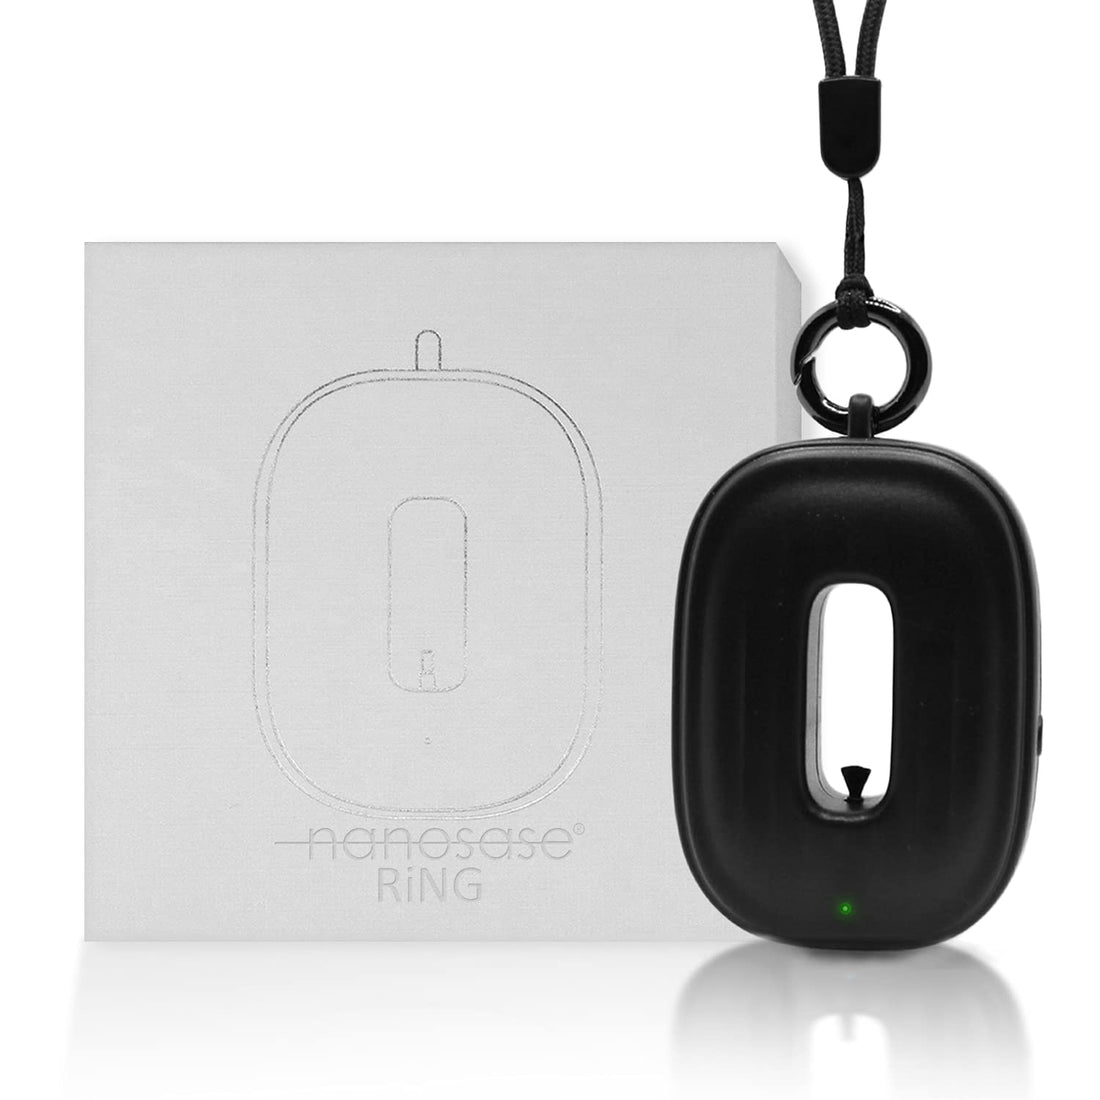 Nanosase ring personal air purifier necklace mini ionic wearable for Kids, Adults, healthy negative ion therapy, filterless mobile air ionizer by igozen. (Black, 1 Pack)